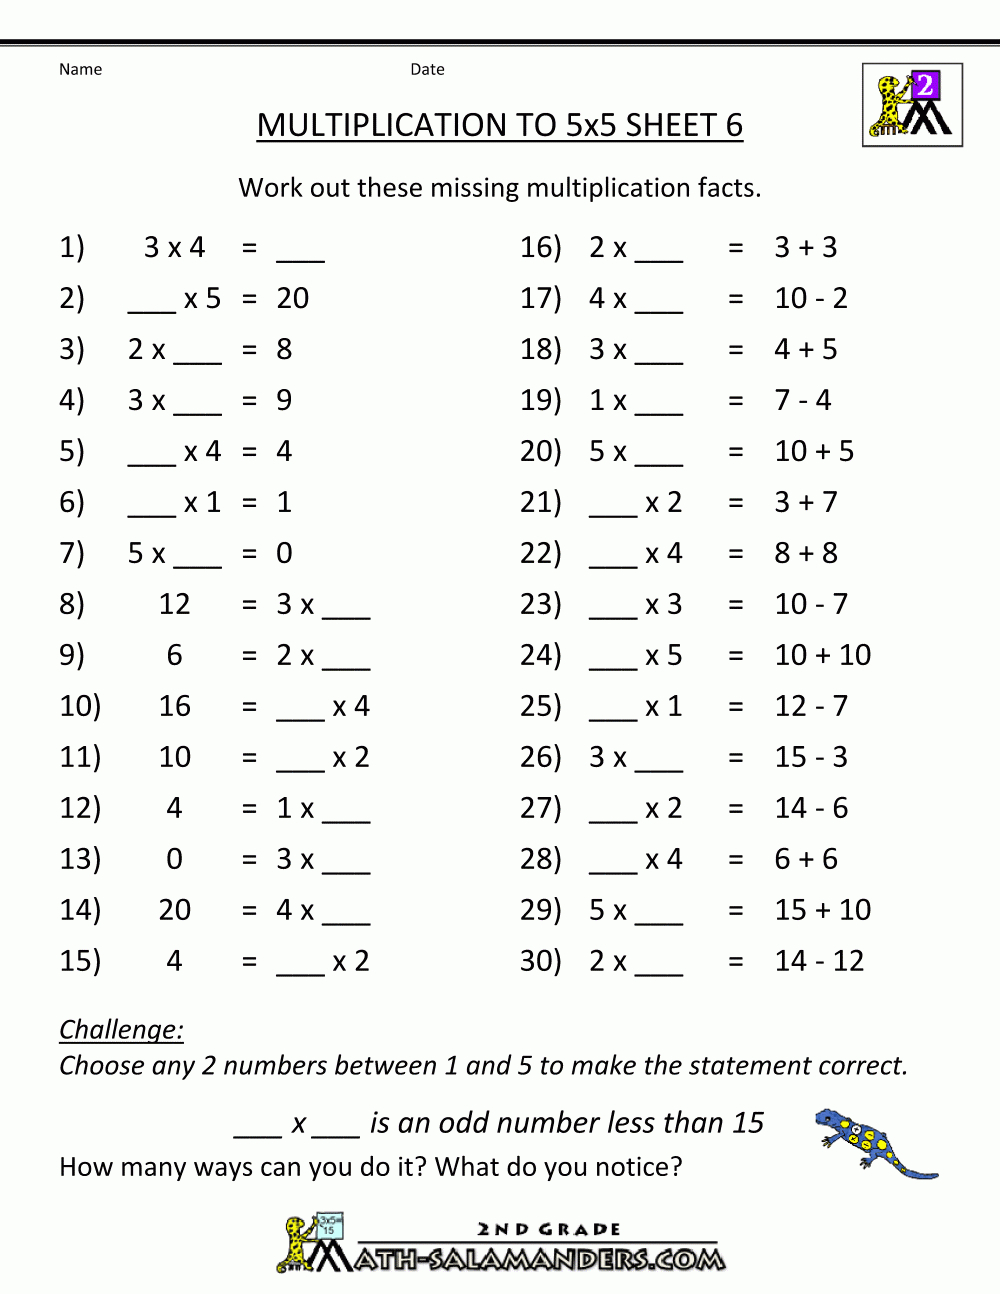 Multiplication Practice Worksheets To 5X5 - Free Printable Math Worksheets Multiplication Facts